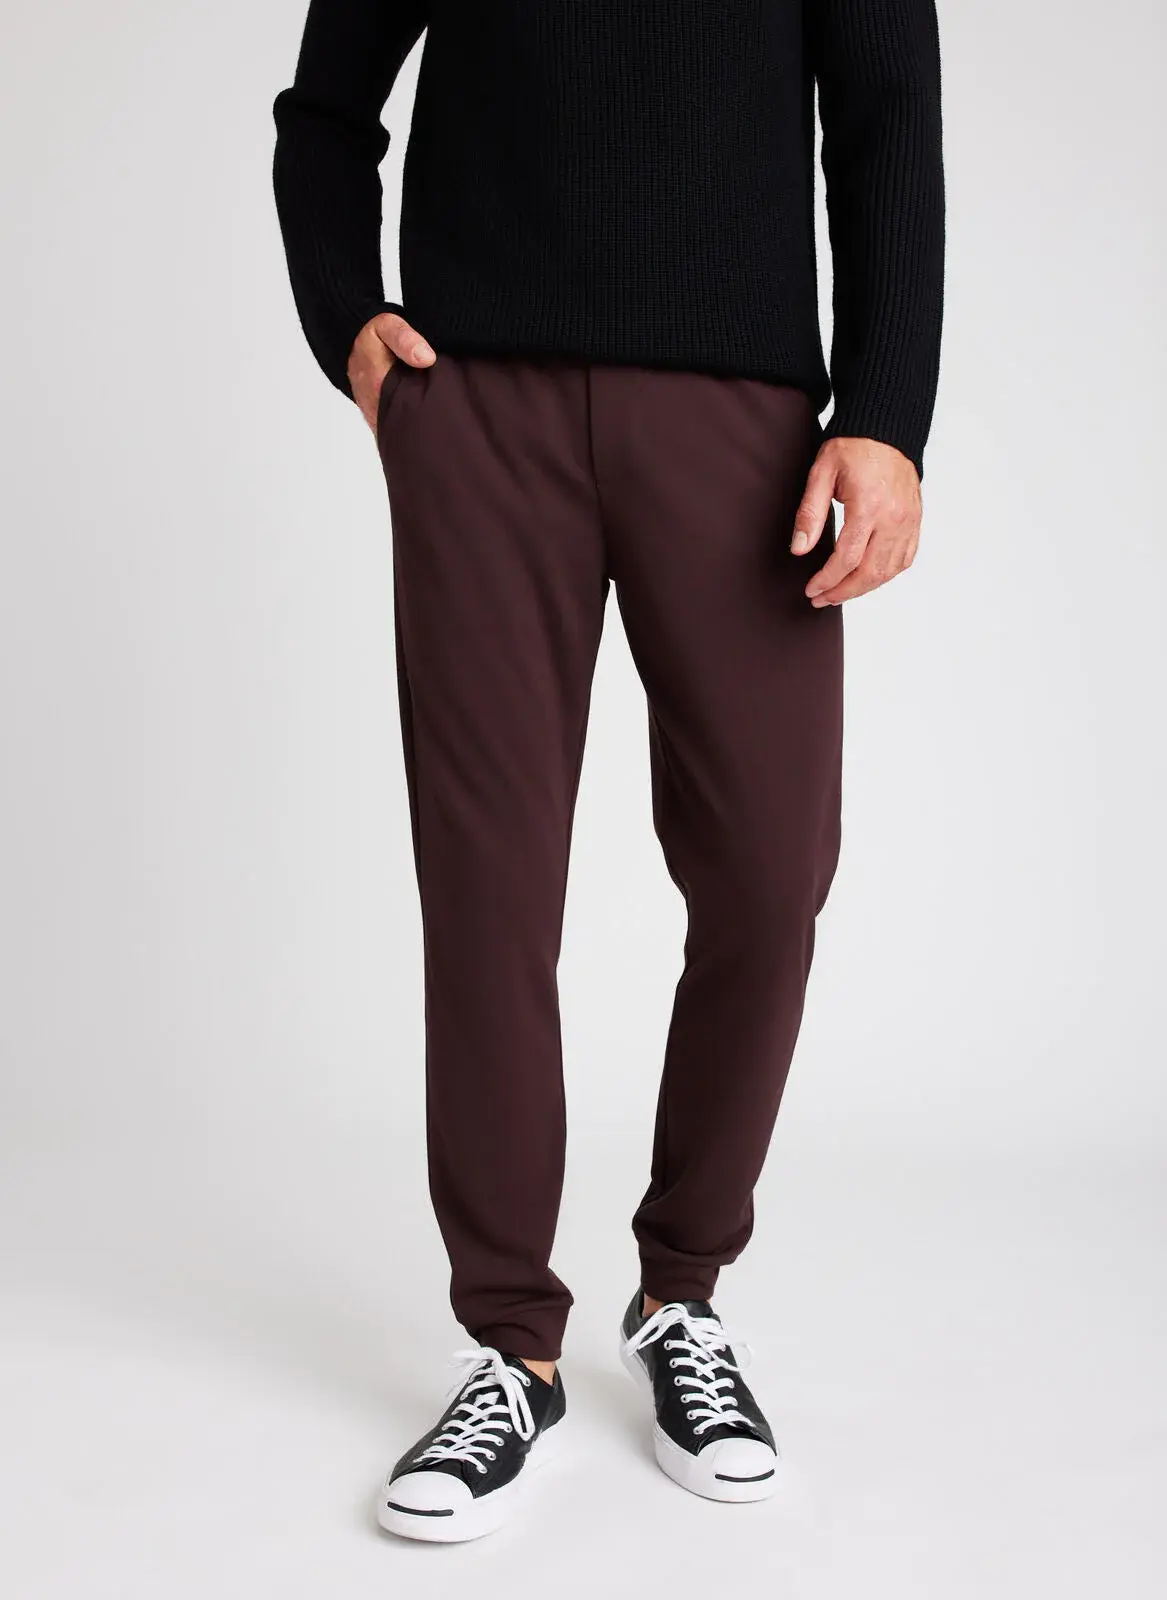 Kit And Ace Double Knit On Time Joggers. 1